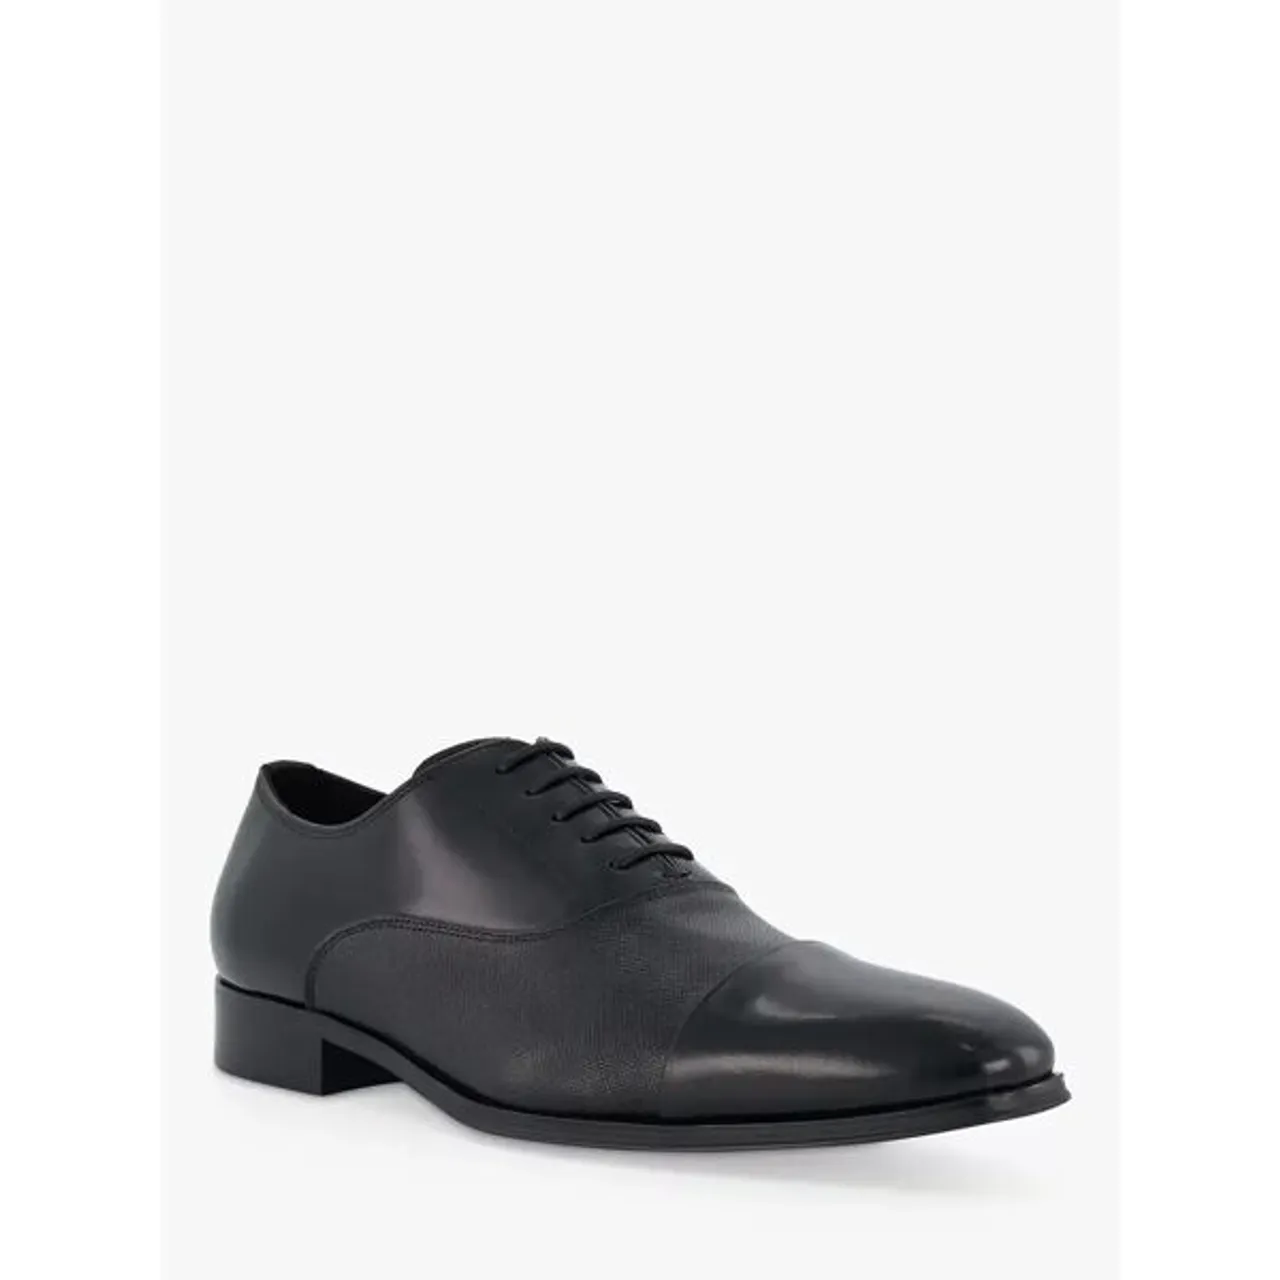 Dune Wide Fit Slating Leather Oxford Shoes, Black - Black-leather - Male